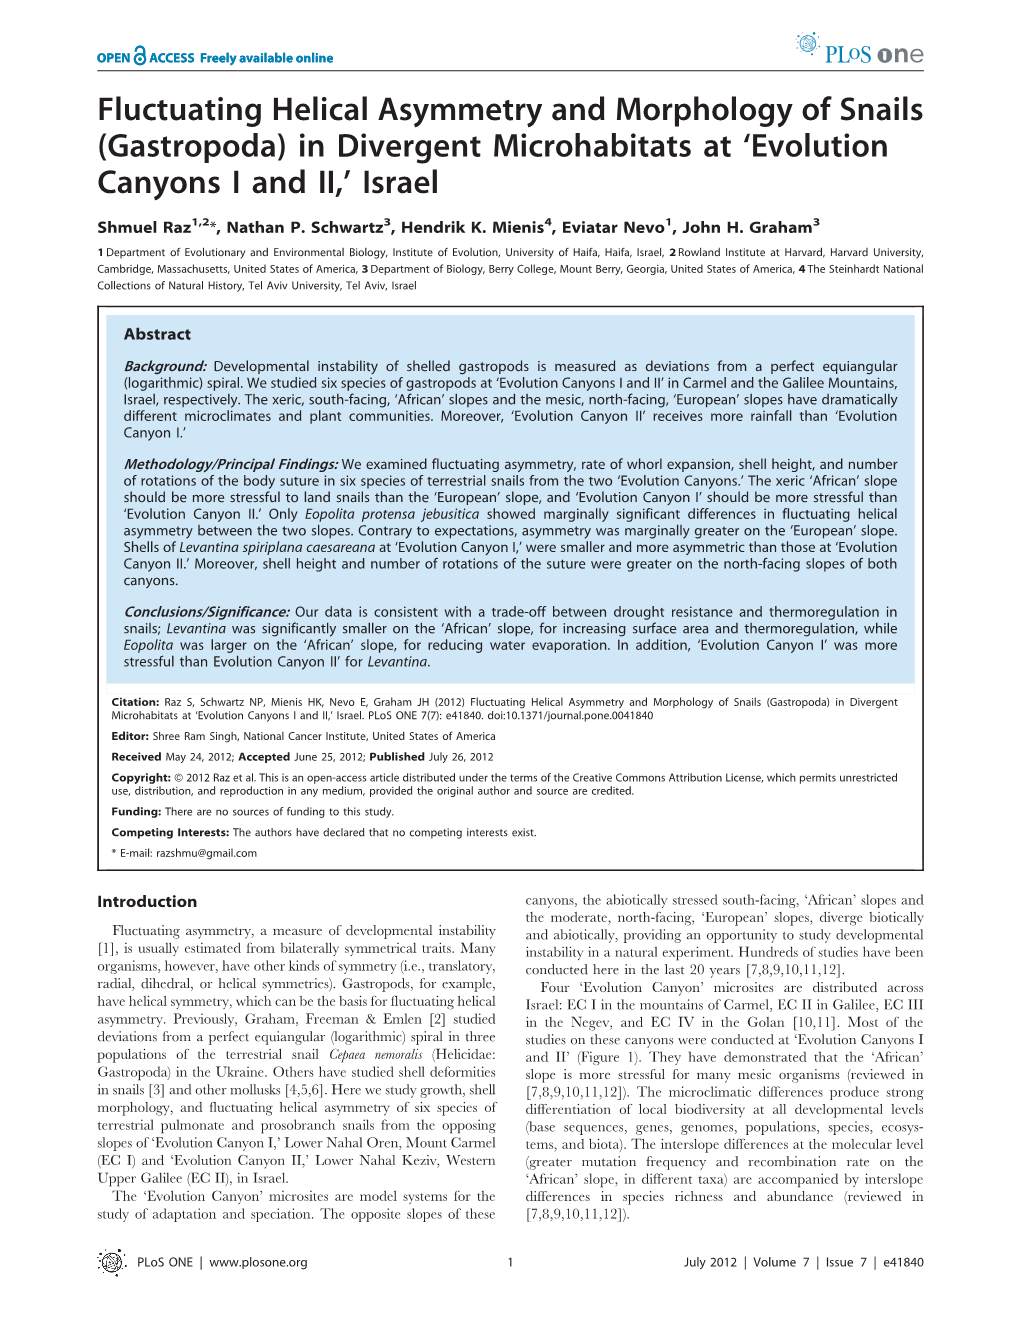 Fluctuating Helical Asymmetry and Morphology of Snails (Gastropoda) in Divergent Microhabitats at ‘Evolution Canyons I and II,’ Israel